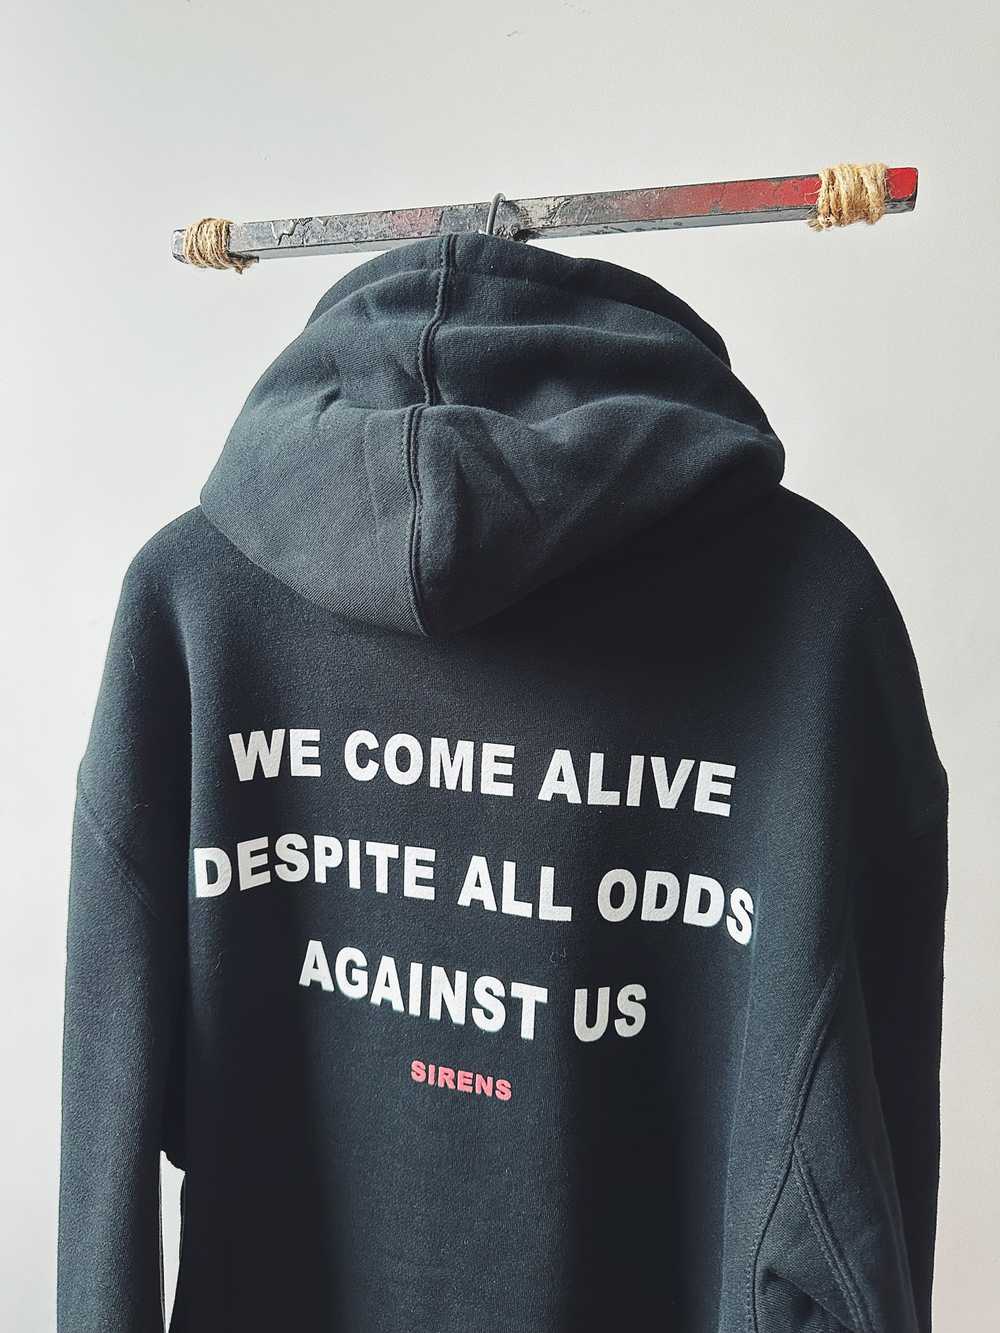 On The Might Of Princes "Sirens" Hoodie - image 2